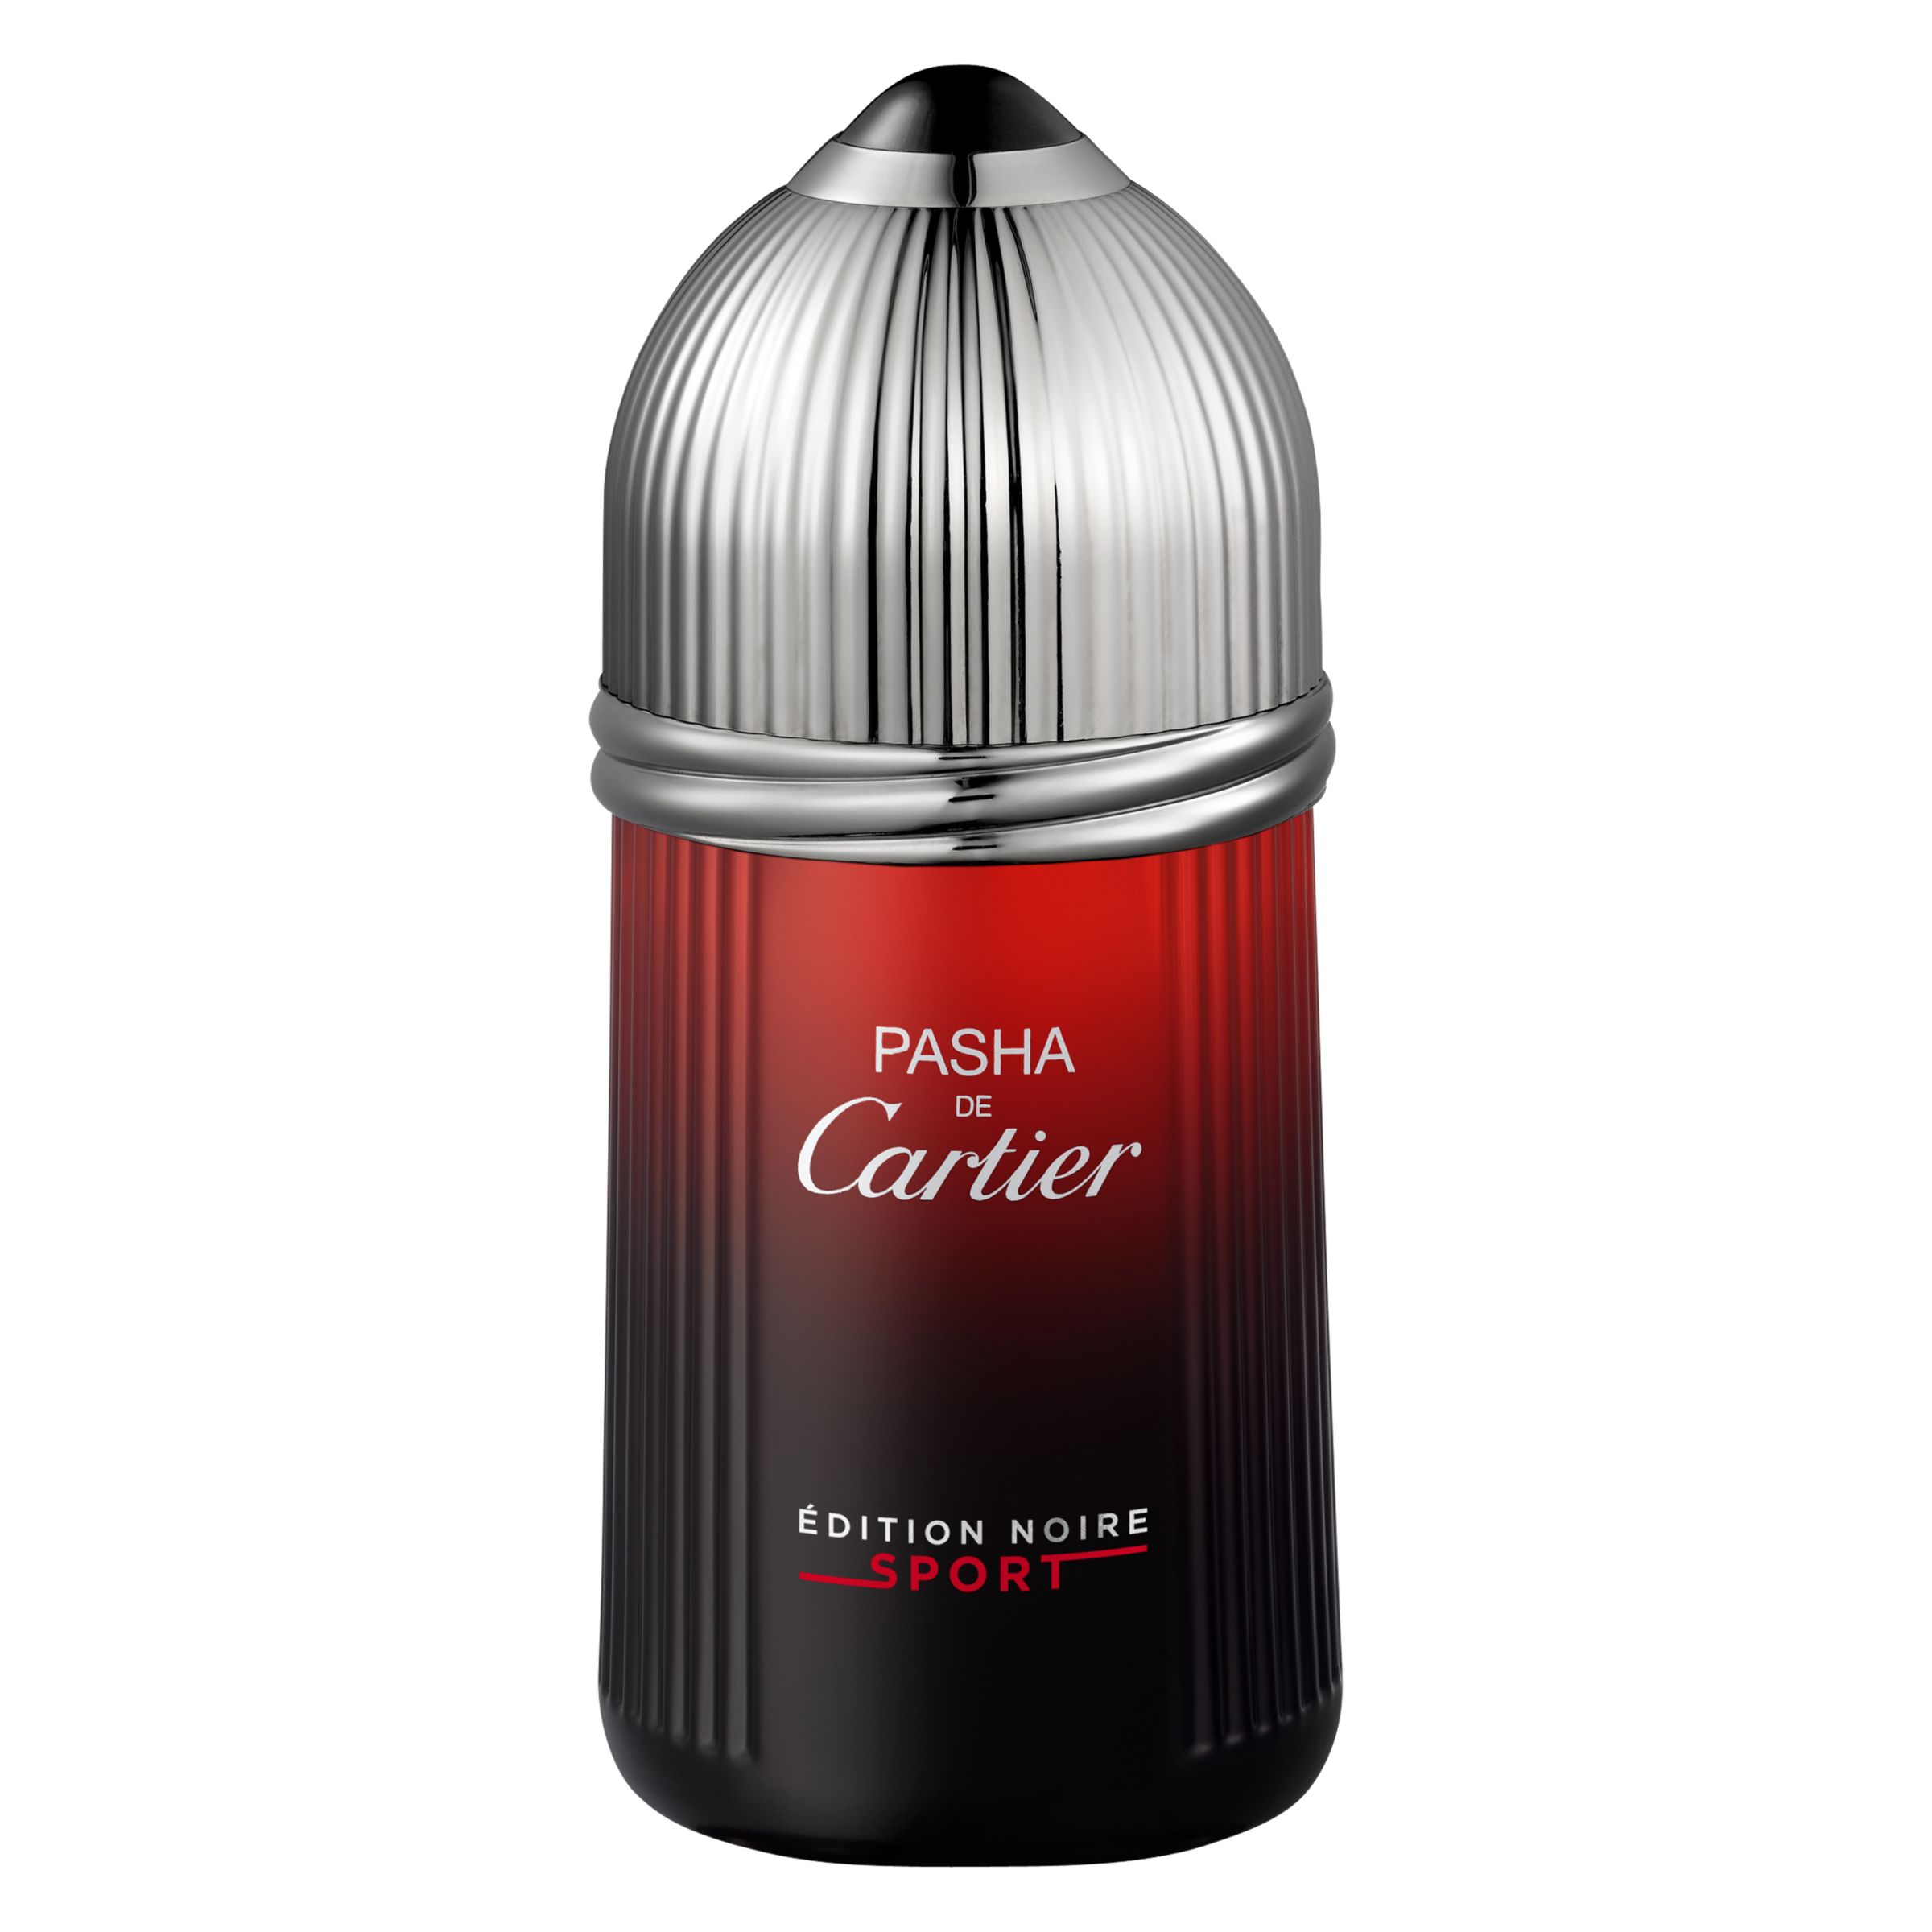 pasha aftershave